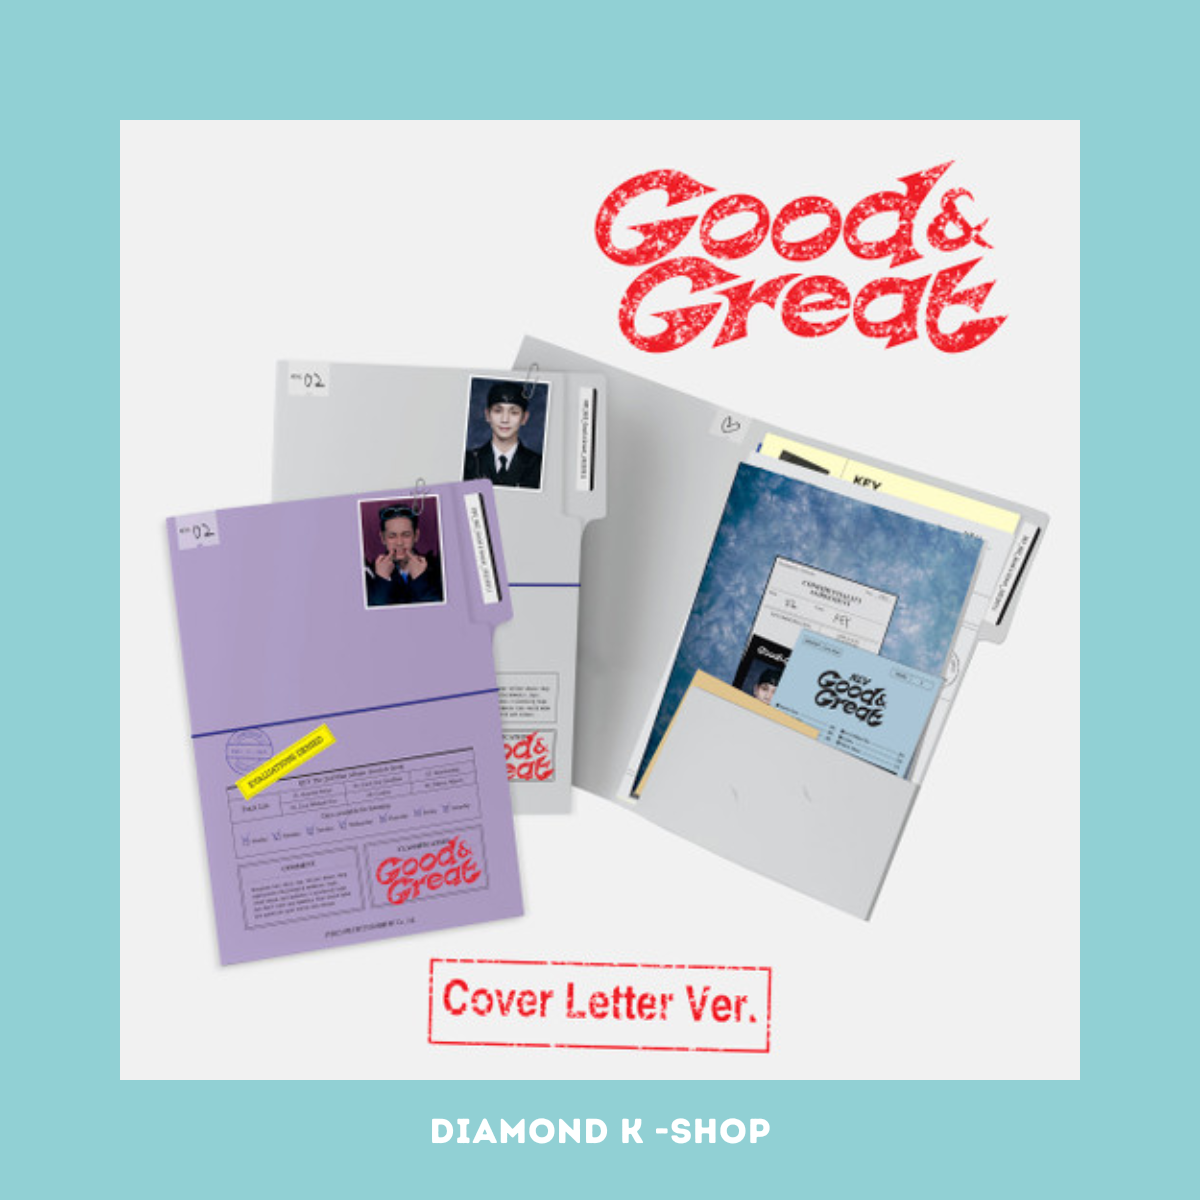 KEY - Good&Great (Cover Letter Ver.)